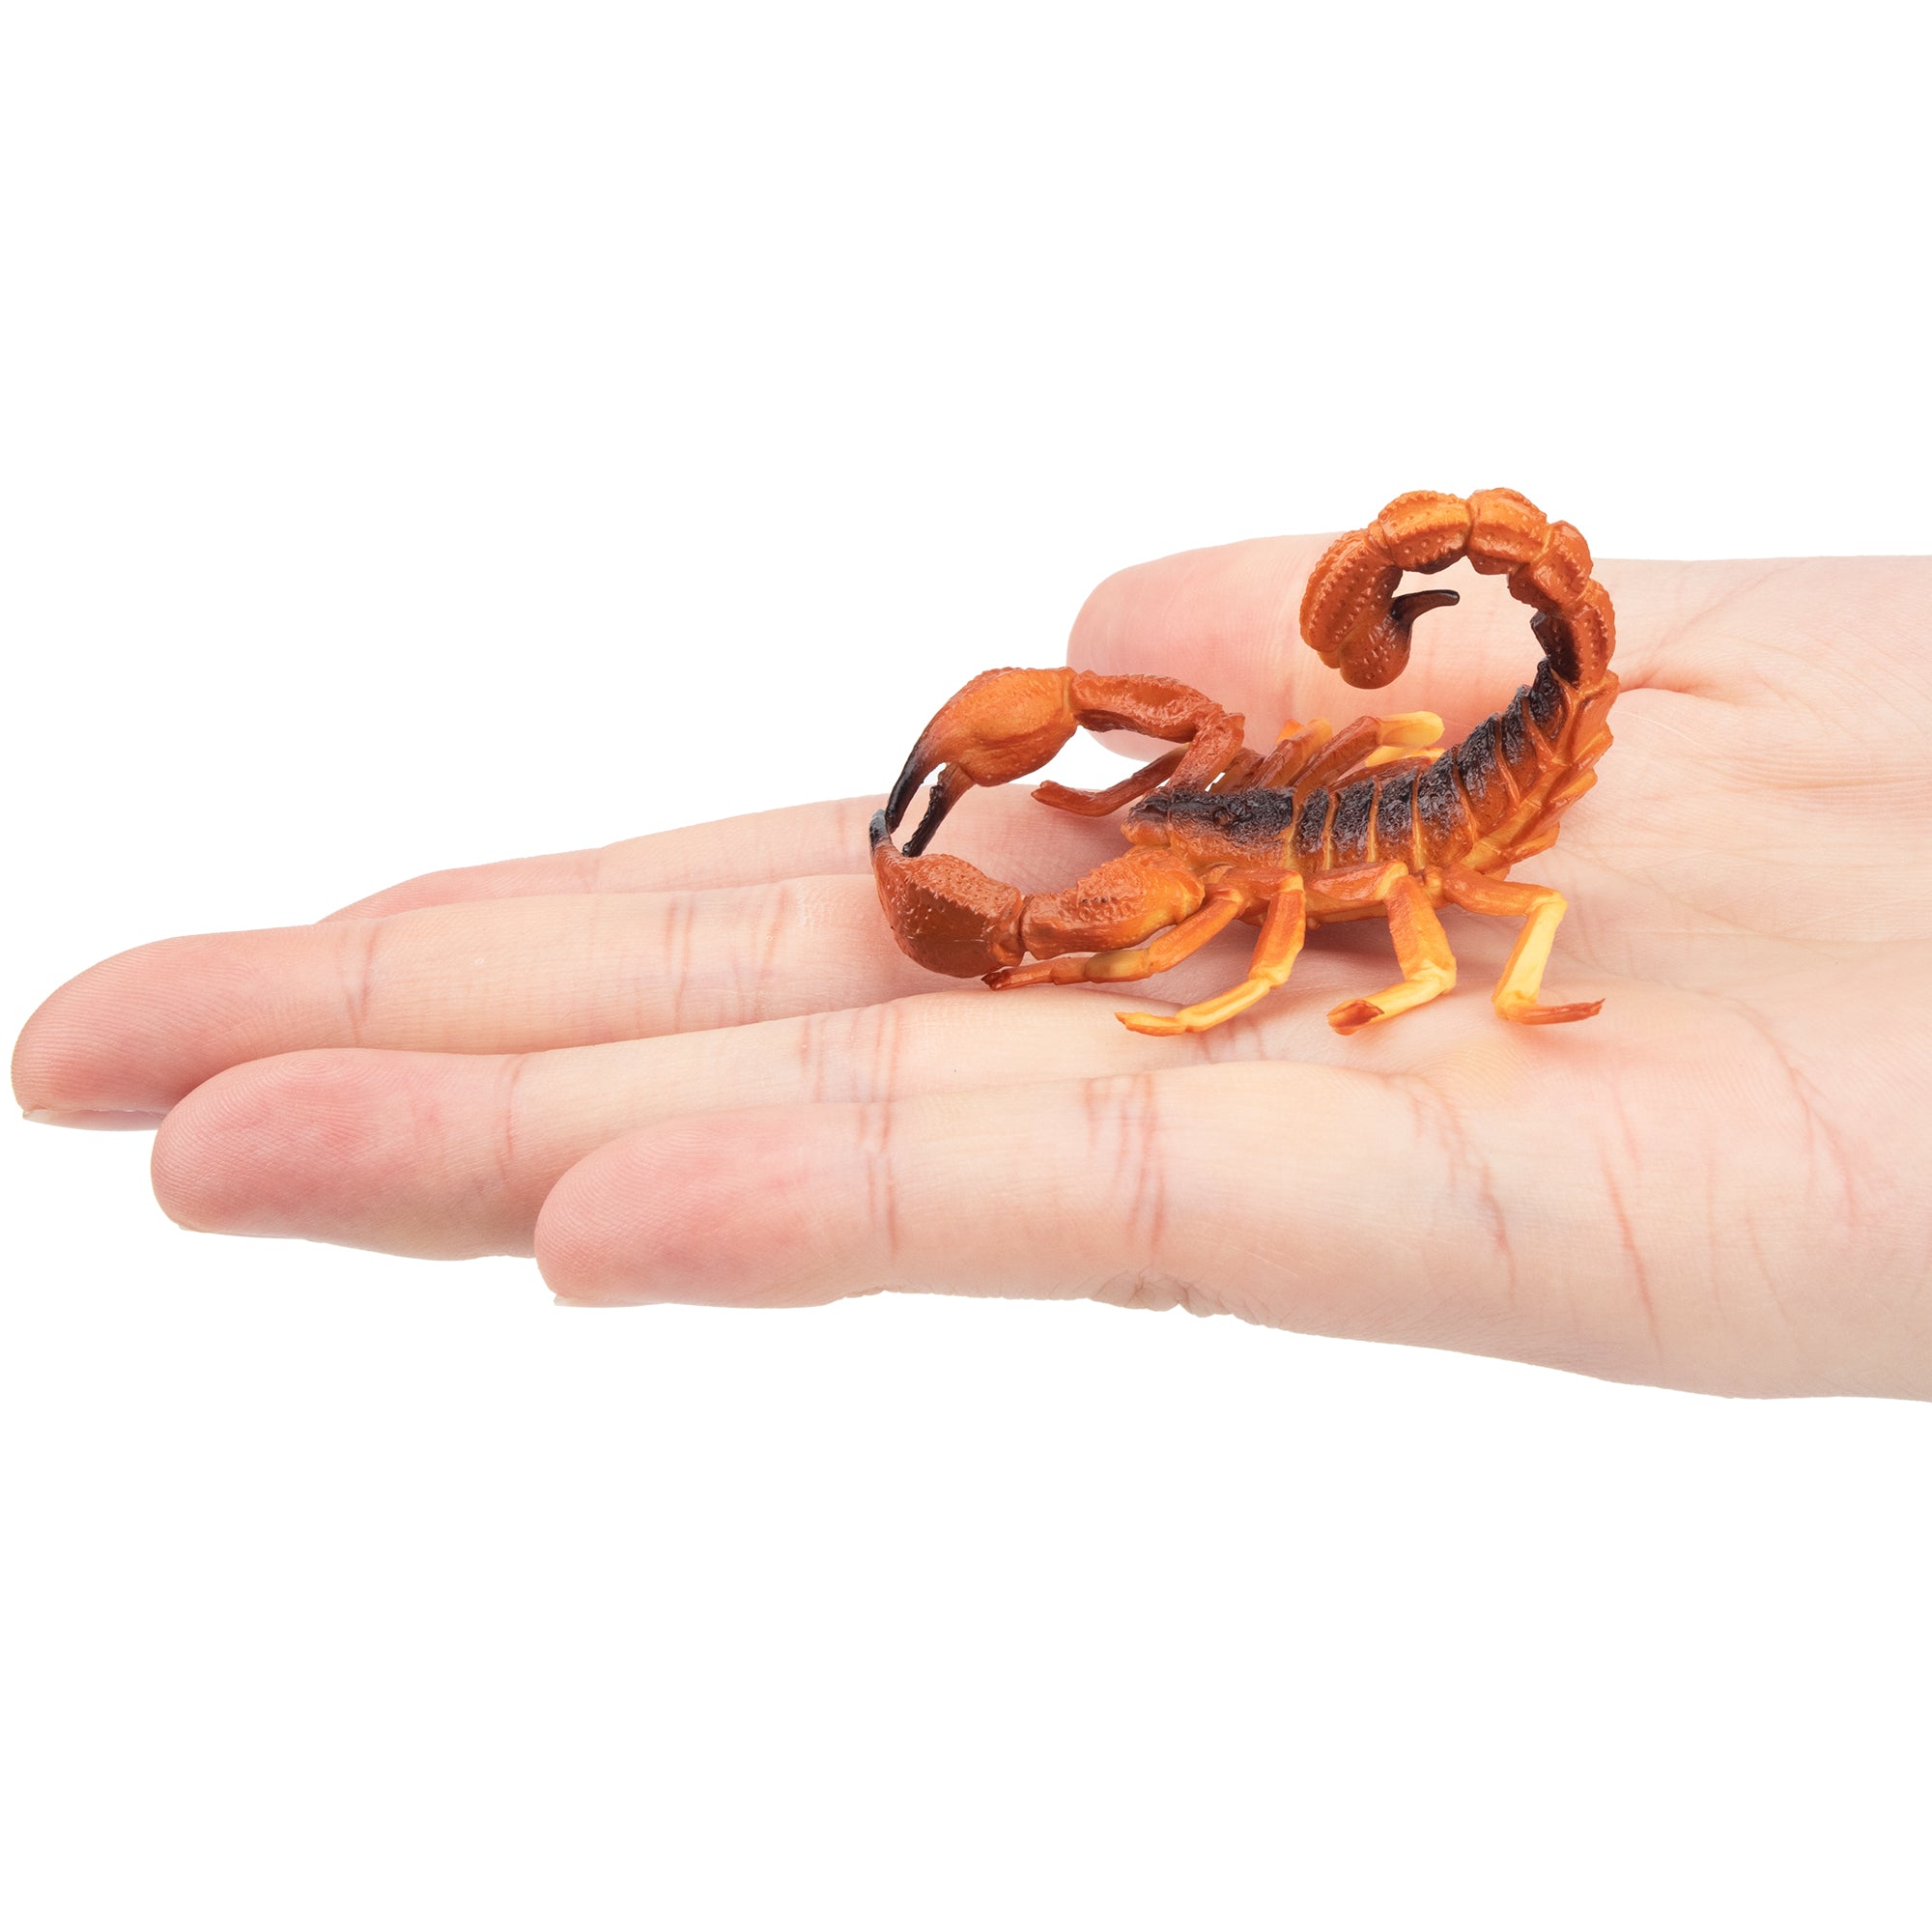 Toymany Red Scorpion Figurine Toy-on hand